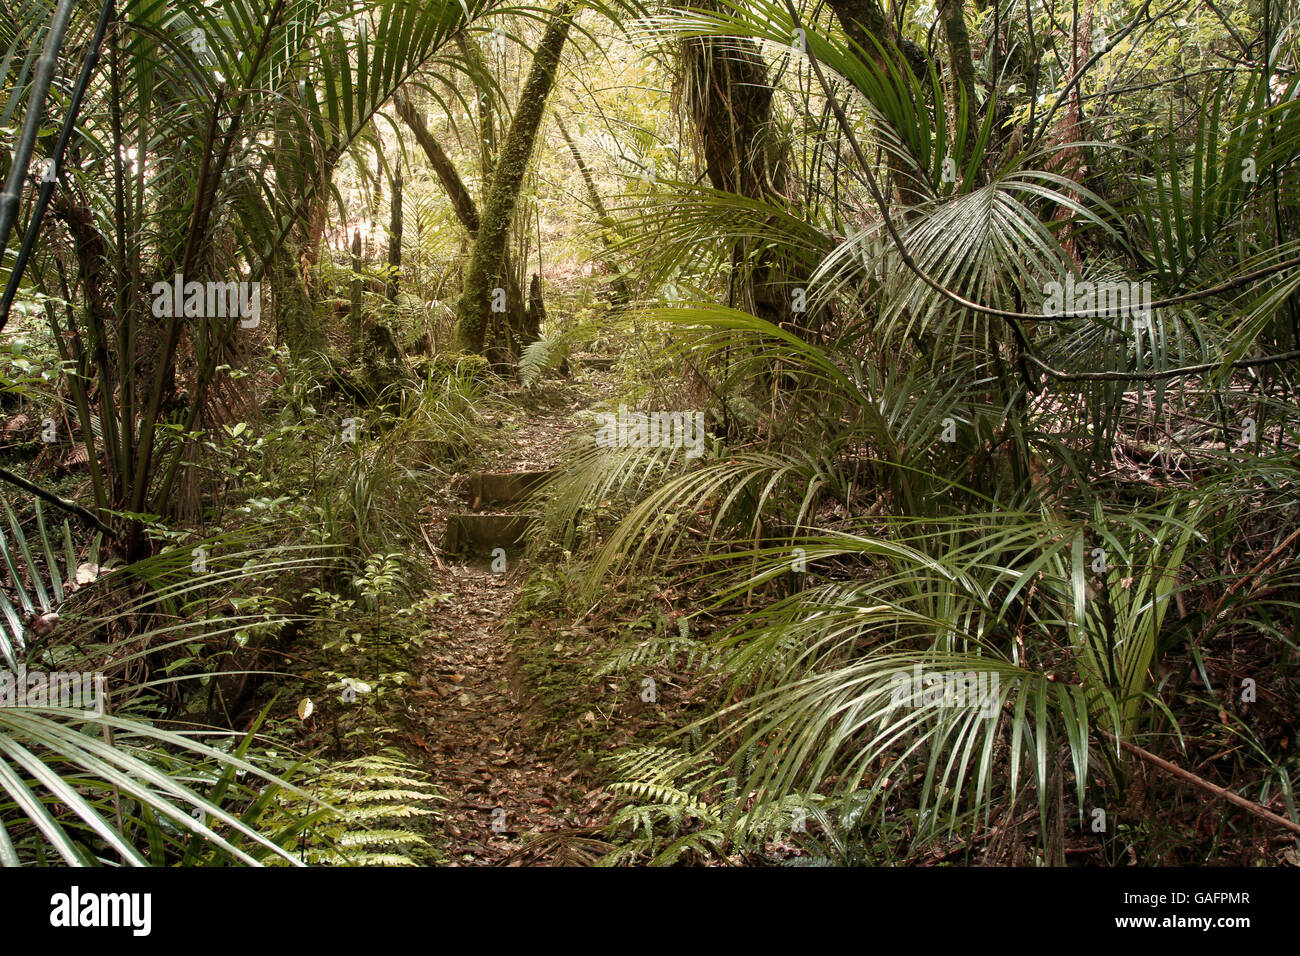 Ferns and vines in tropical jungle Stock Photo